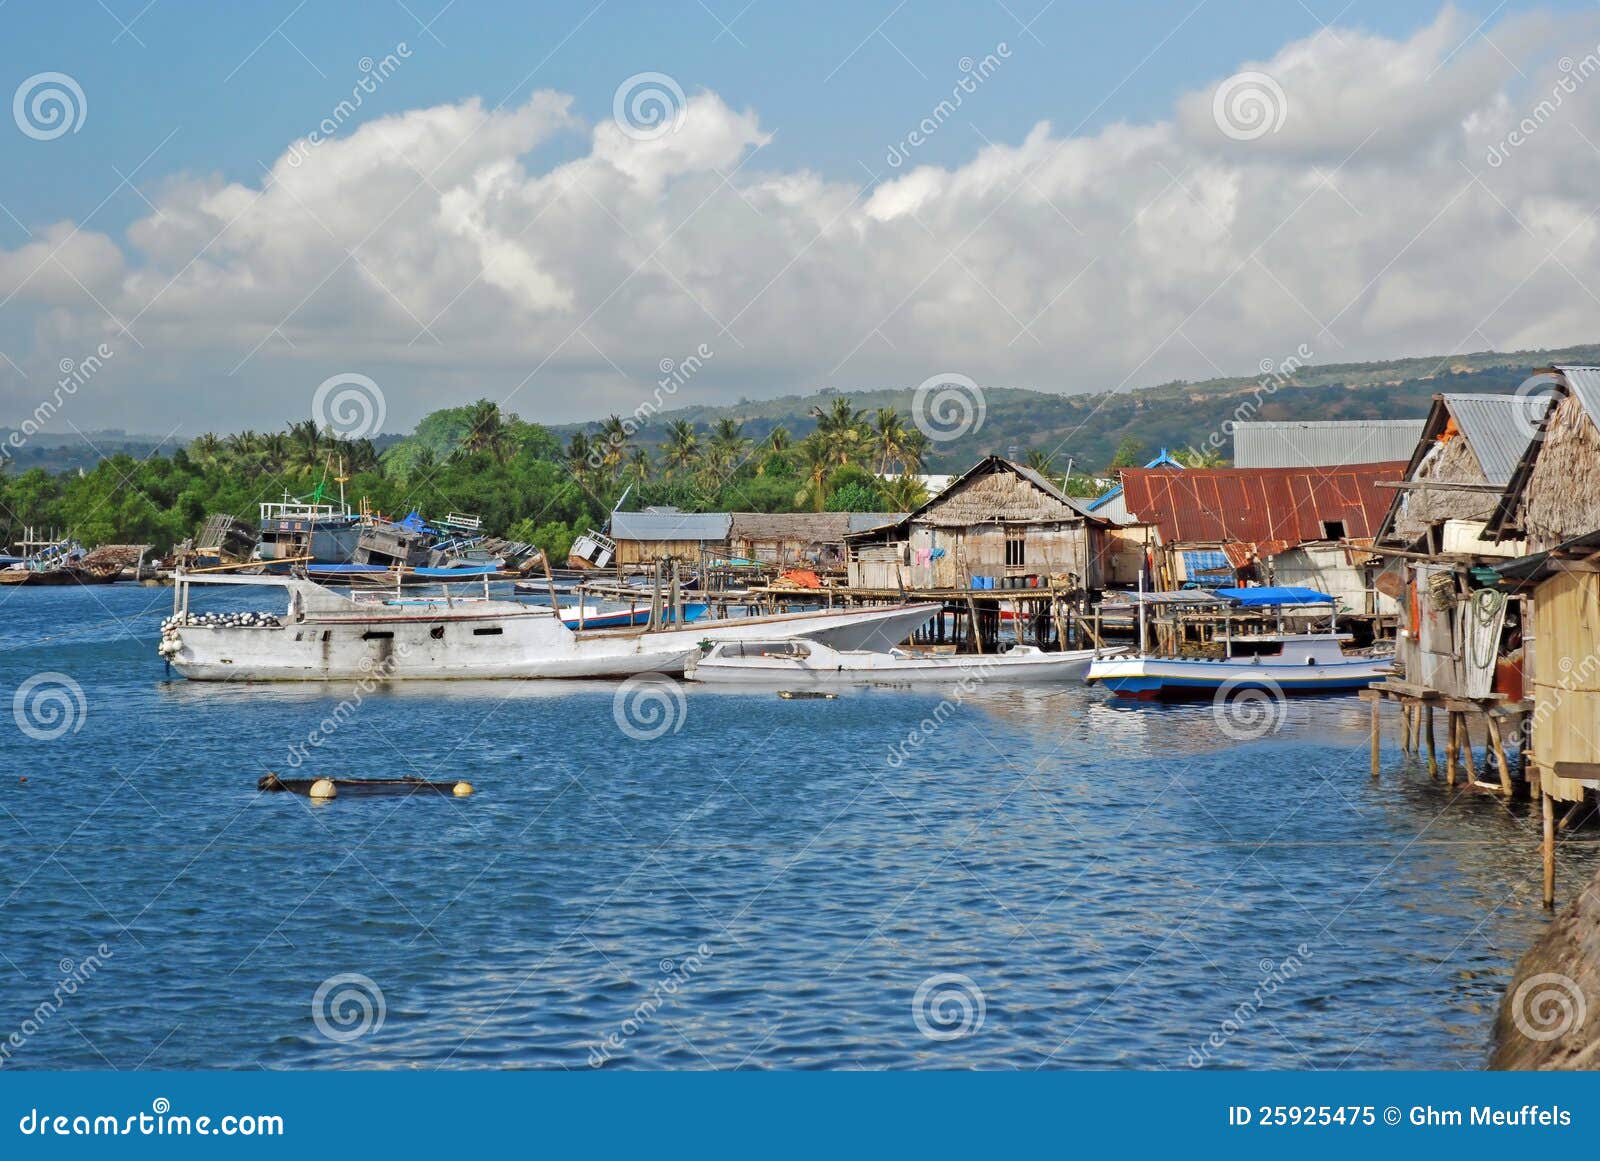 harbour and houses on stilts, maumere, indonesia